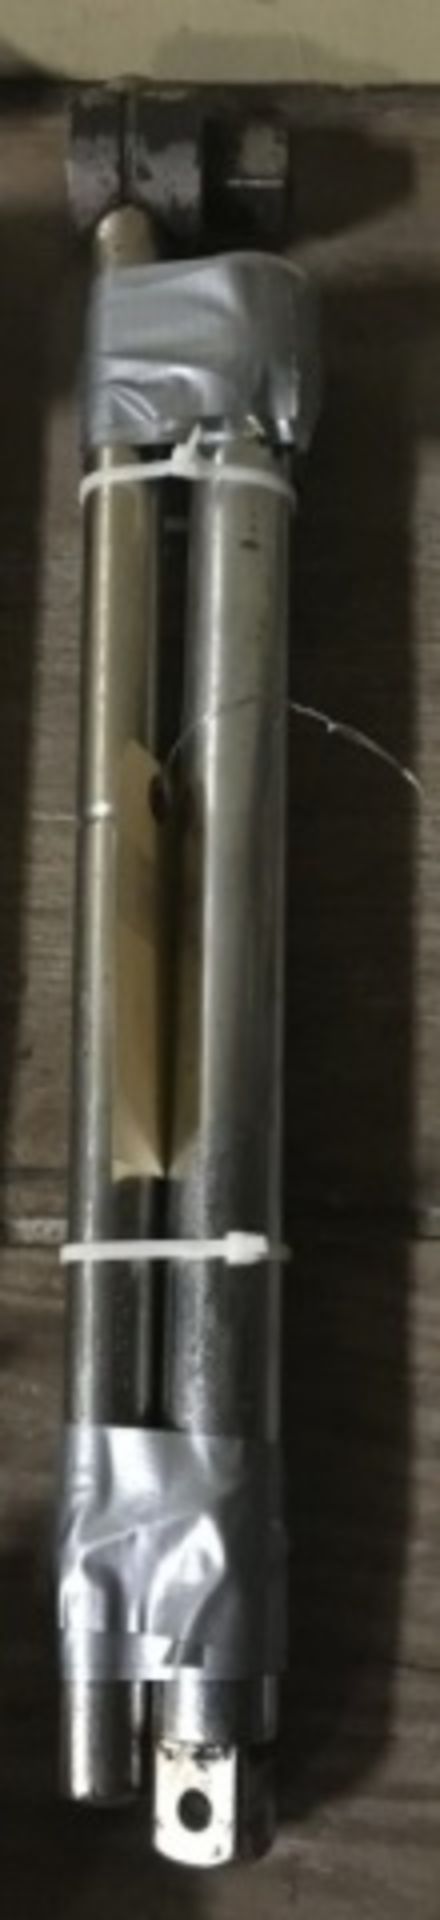 Armstrong 1" drive ratchet